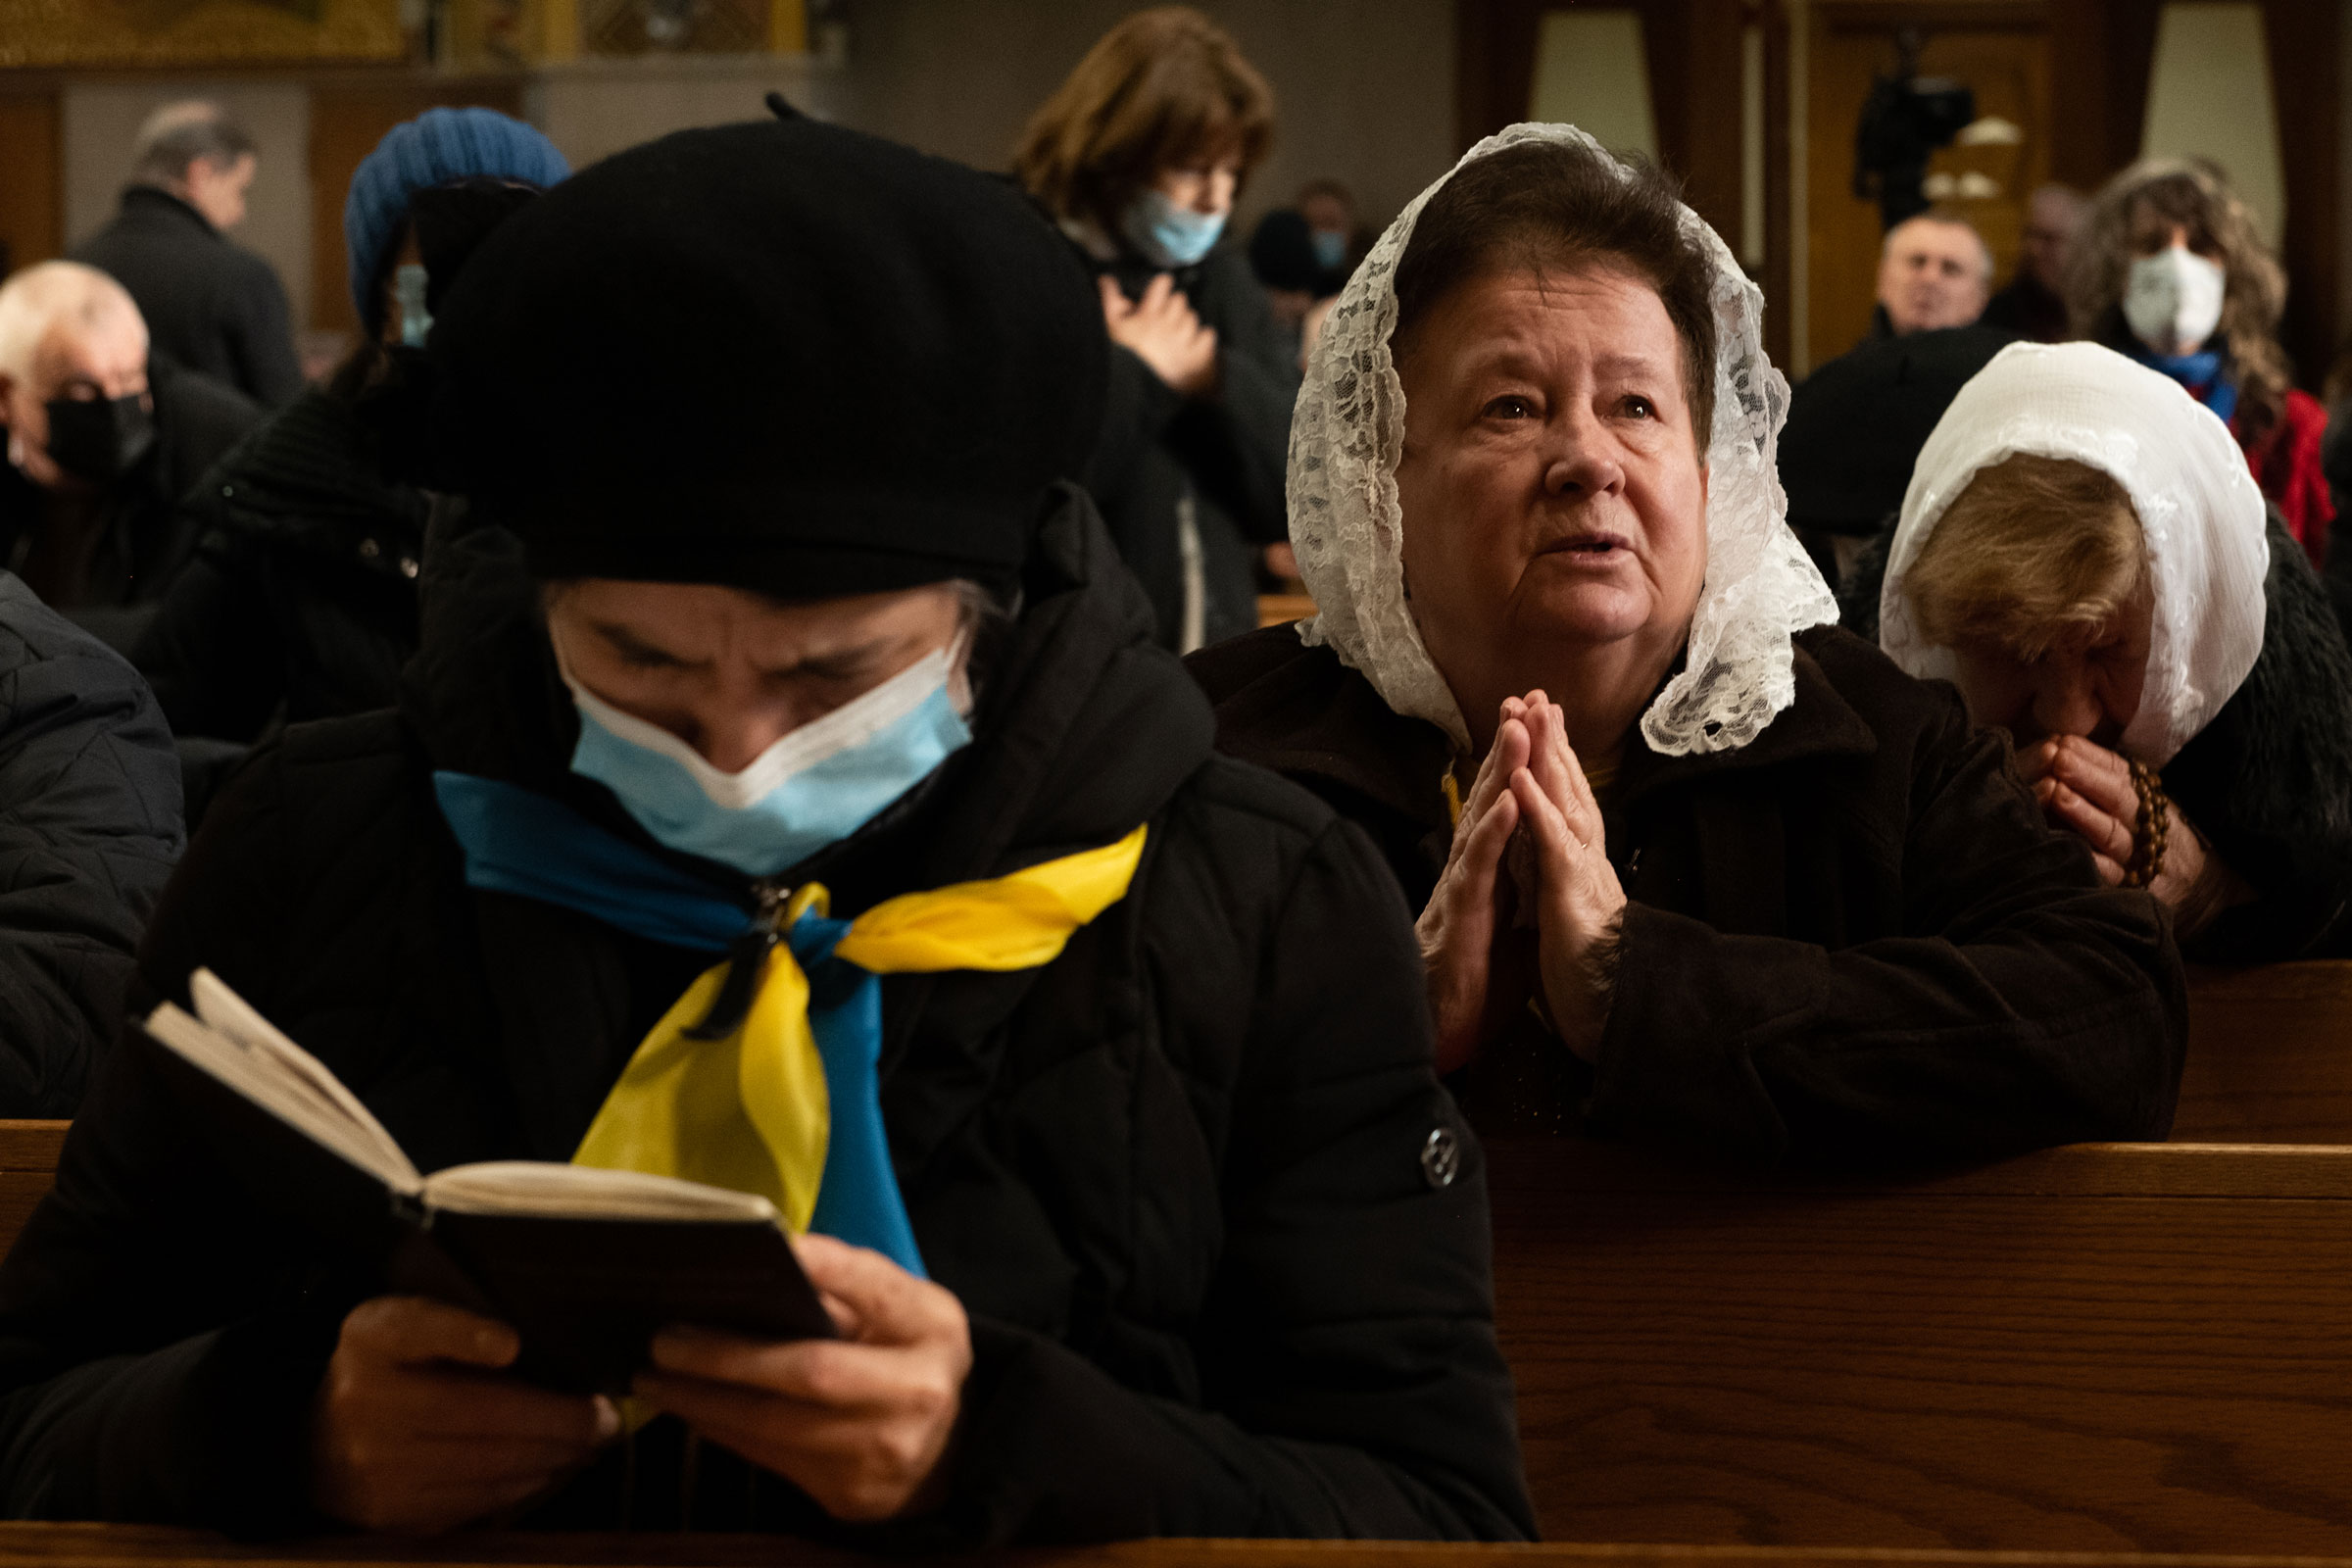 A woman prays at mass at St. George’s Church on February 27, 2022 in New York City. (Alexi Rosenfeld—Getty Images)